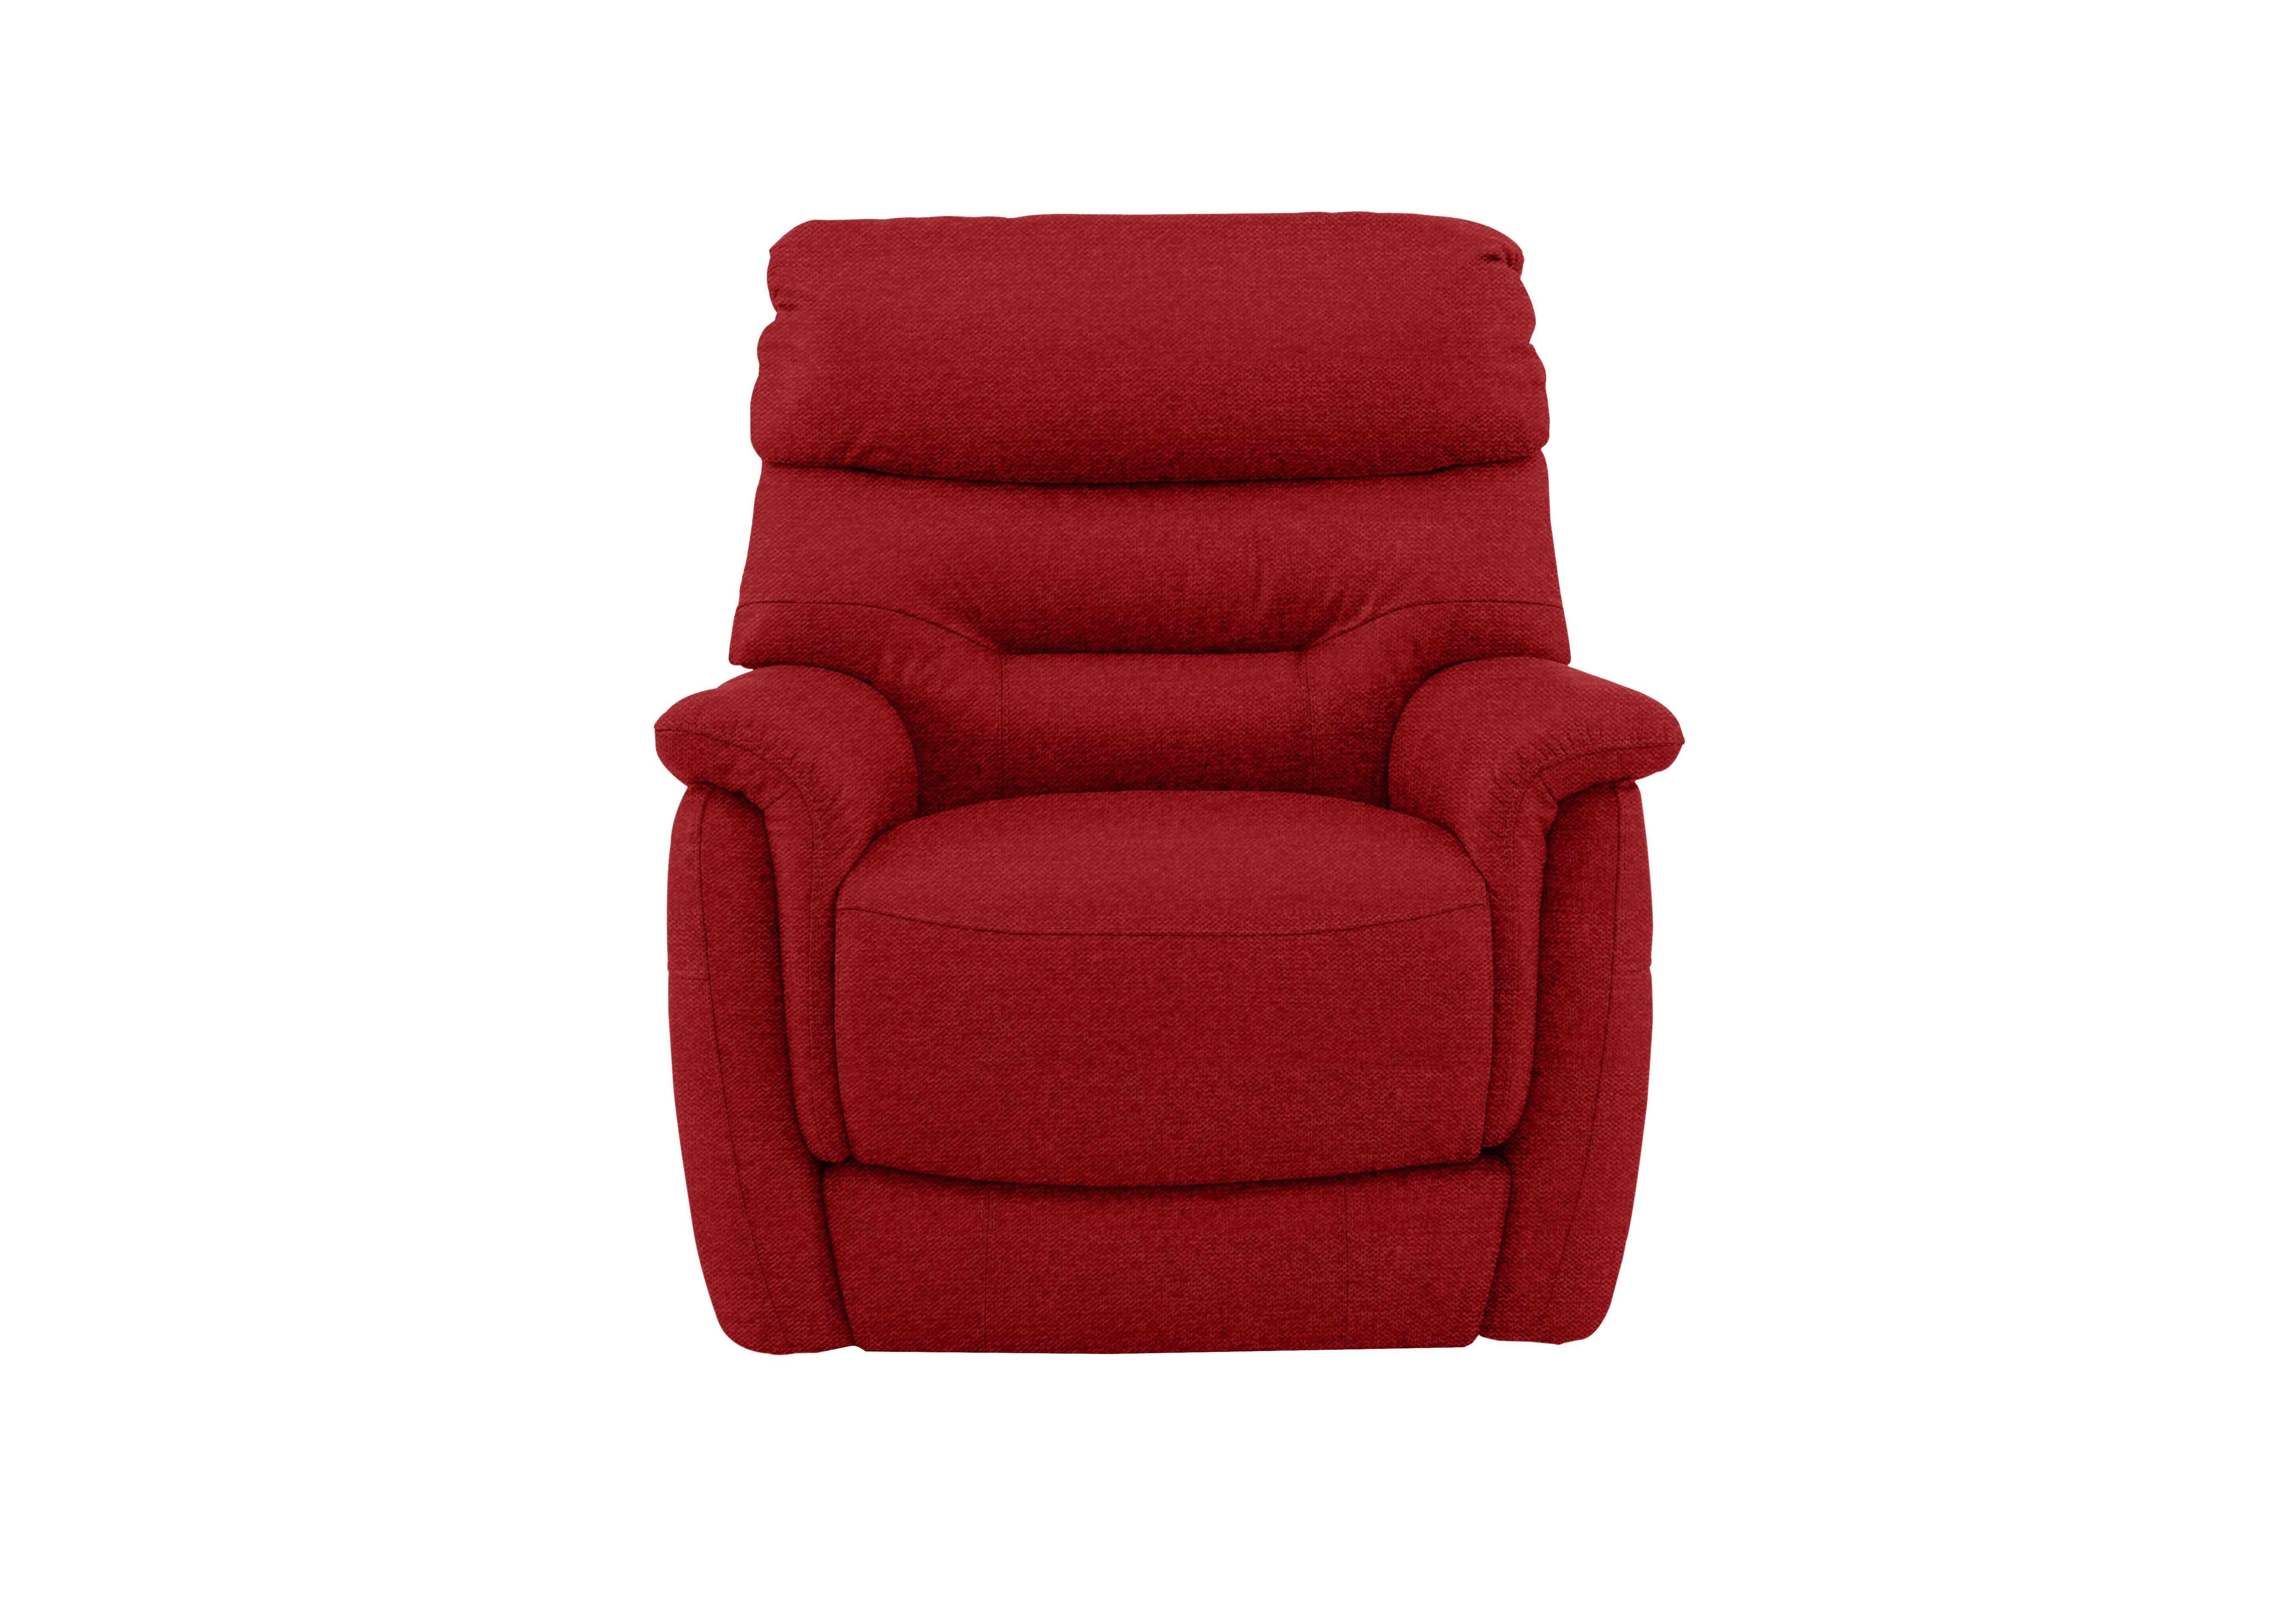 Chicago Fabric Armchair in Fab-Blt-R29 Red on Furniture Village